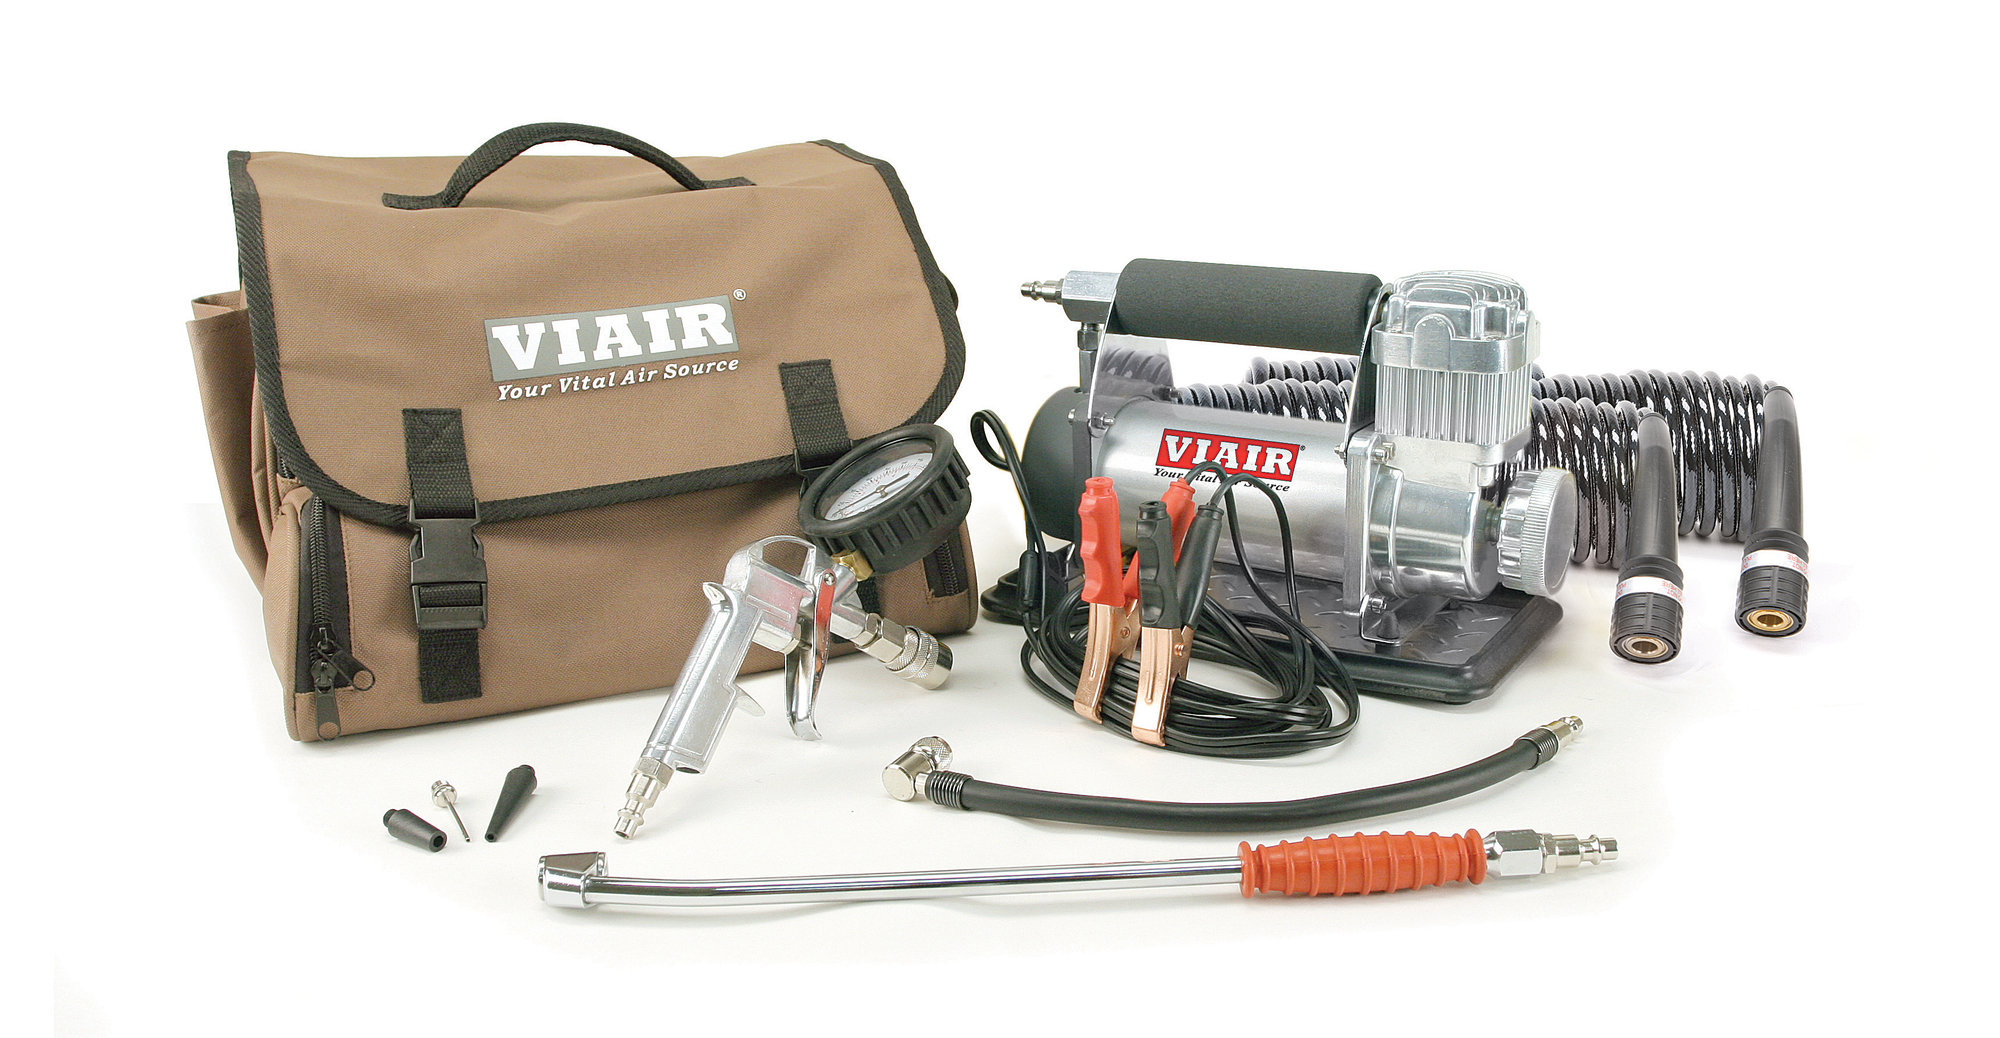 https://www.quadratec.com/sites/default/files/styles/product_zoomed/public/product_images/viair-400-portable-air-compressor-40047-tabletop-main.jpg